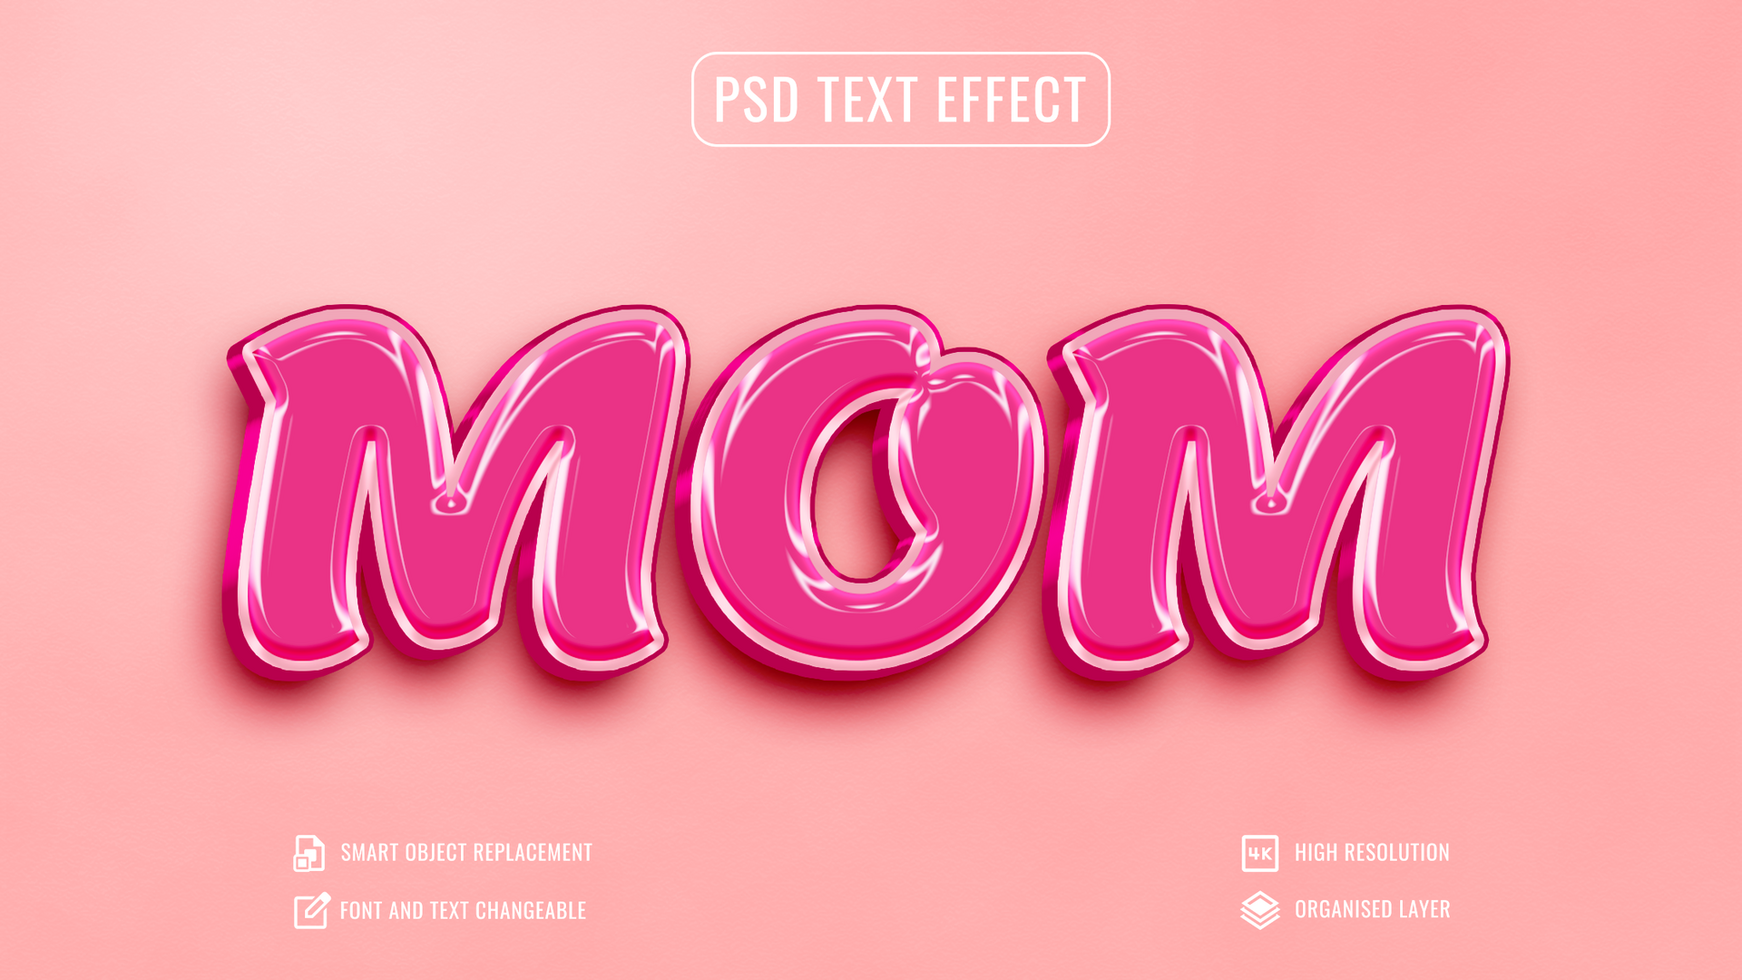 Mothers day editable glossy text effect psd